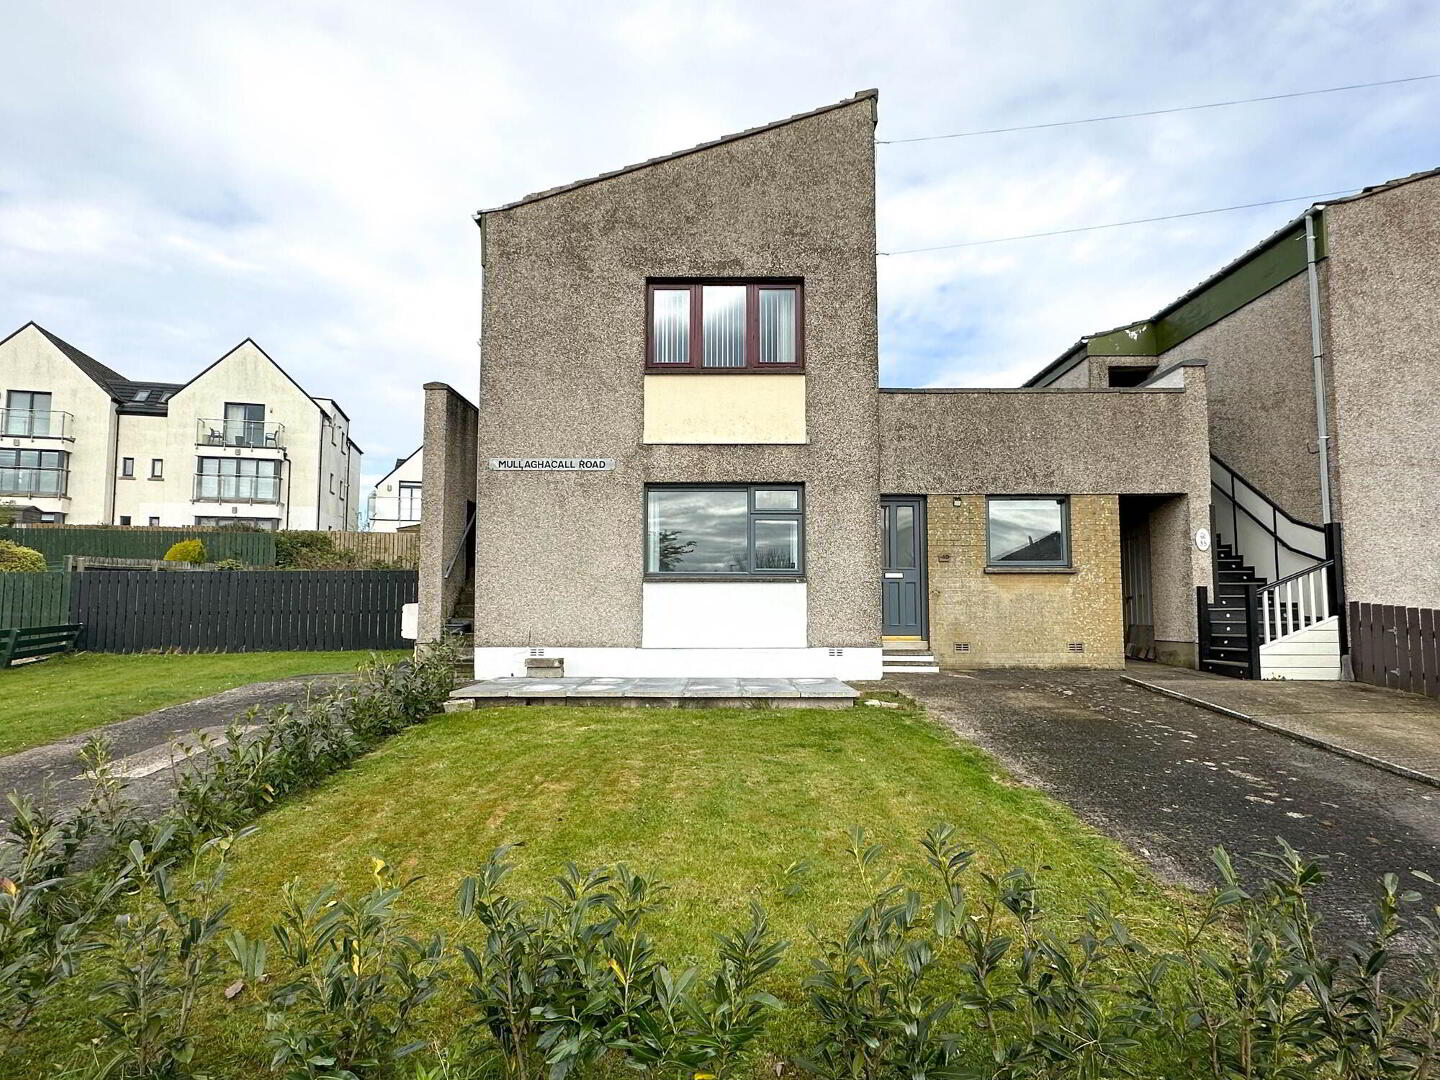 Apt 49, Mullaghacall Road